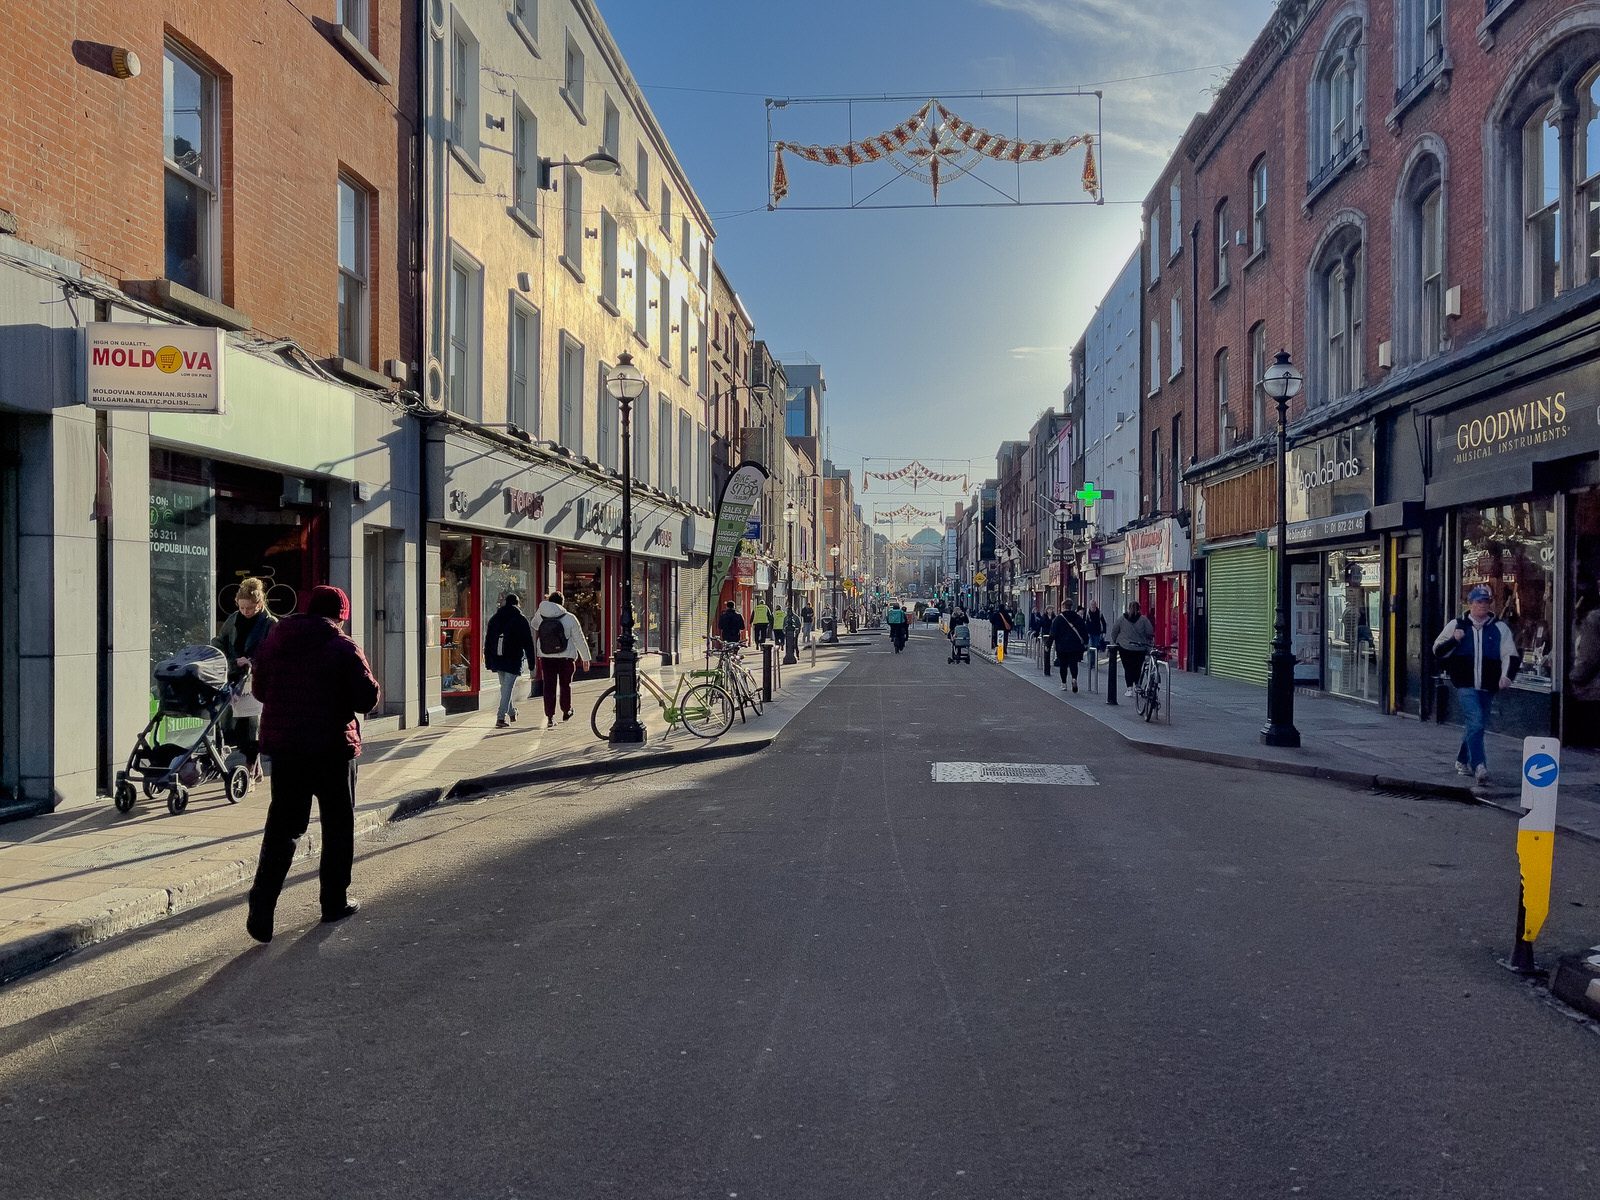 THE NEW STREET FURNITURE AND THE CHRISTMAS TREE [HAVE ARRIVED IN CAPEL STREET]-225863-1